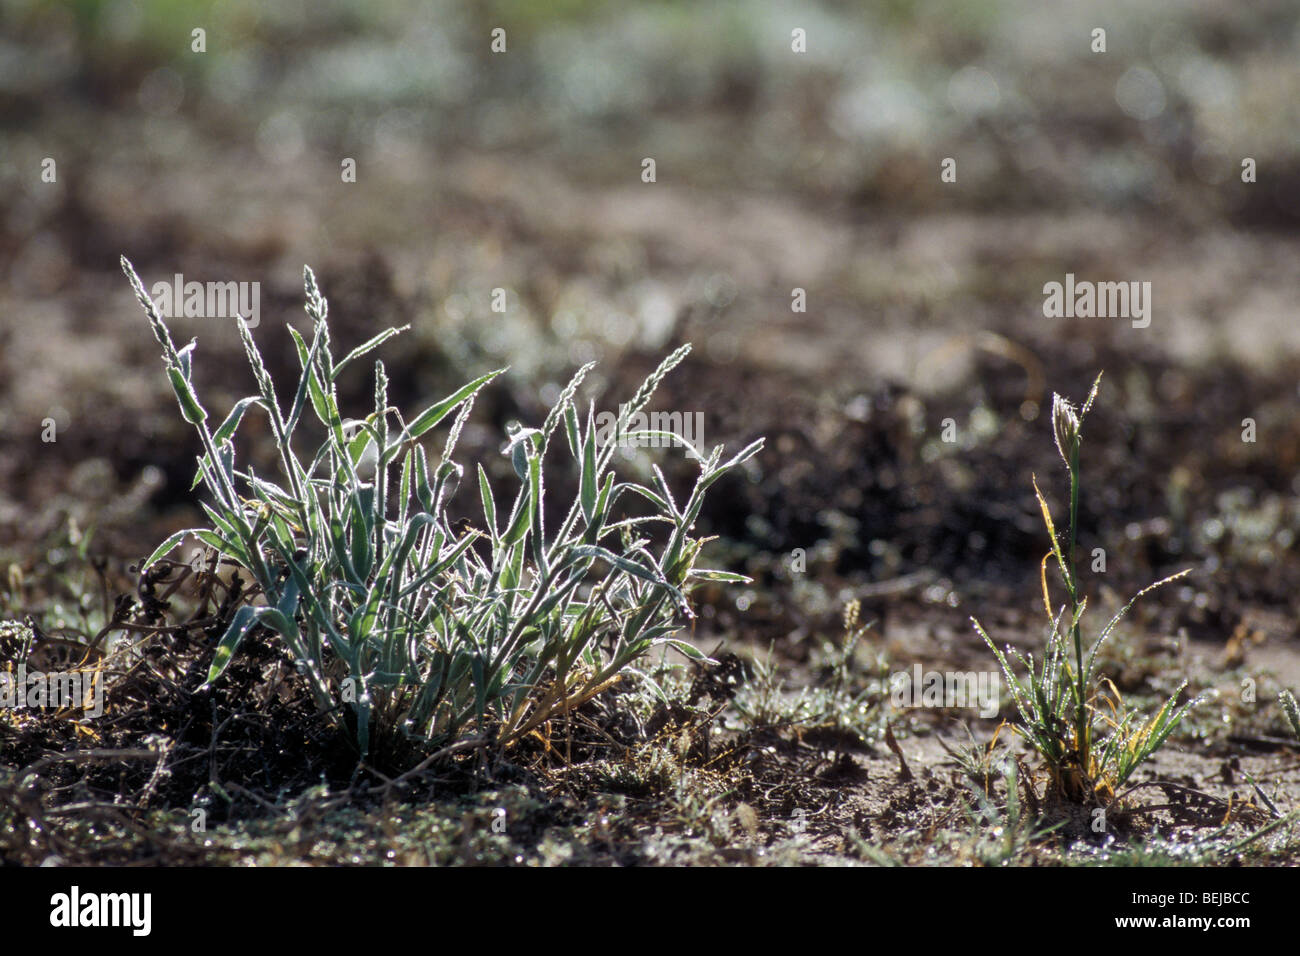 Fresh shoots of grass, covered in dew during the rainy season in the Kalahari desert, Kgalagadi Transfrontier Park, South Africa Stock Photo